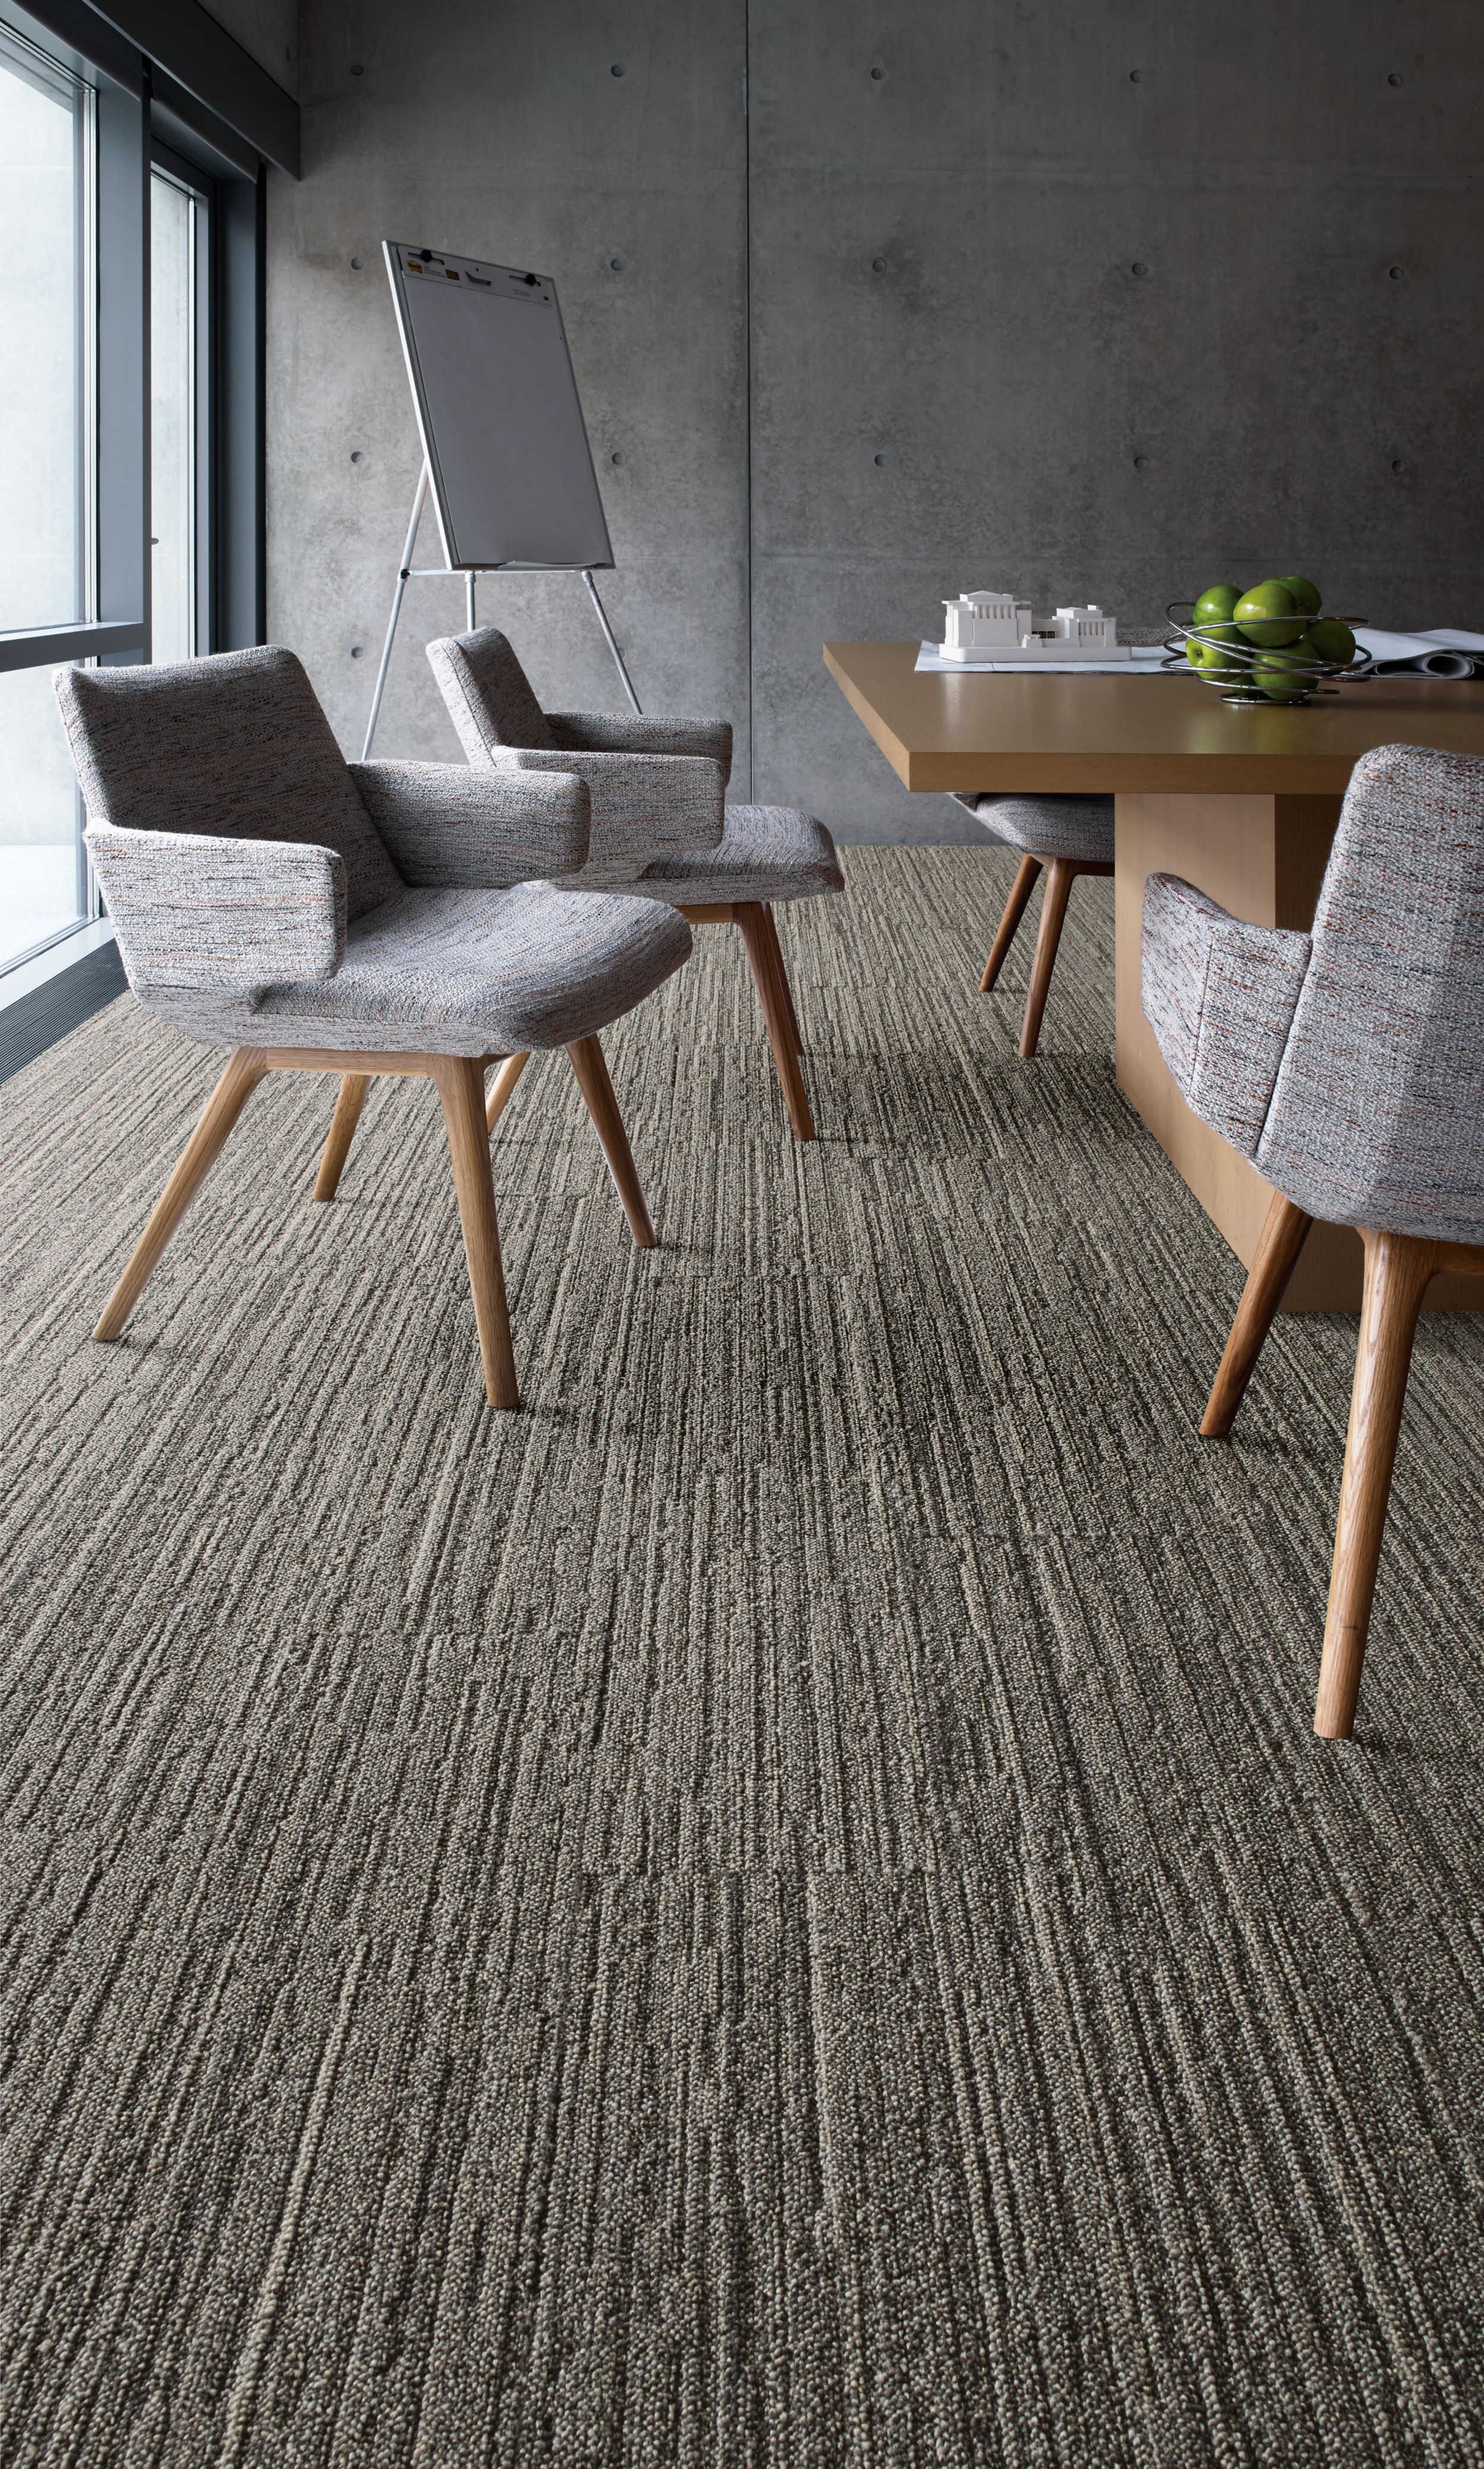 image Interface WW880 plank carpet tile in meeting room with table and chairs numéro 5